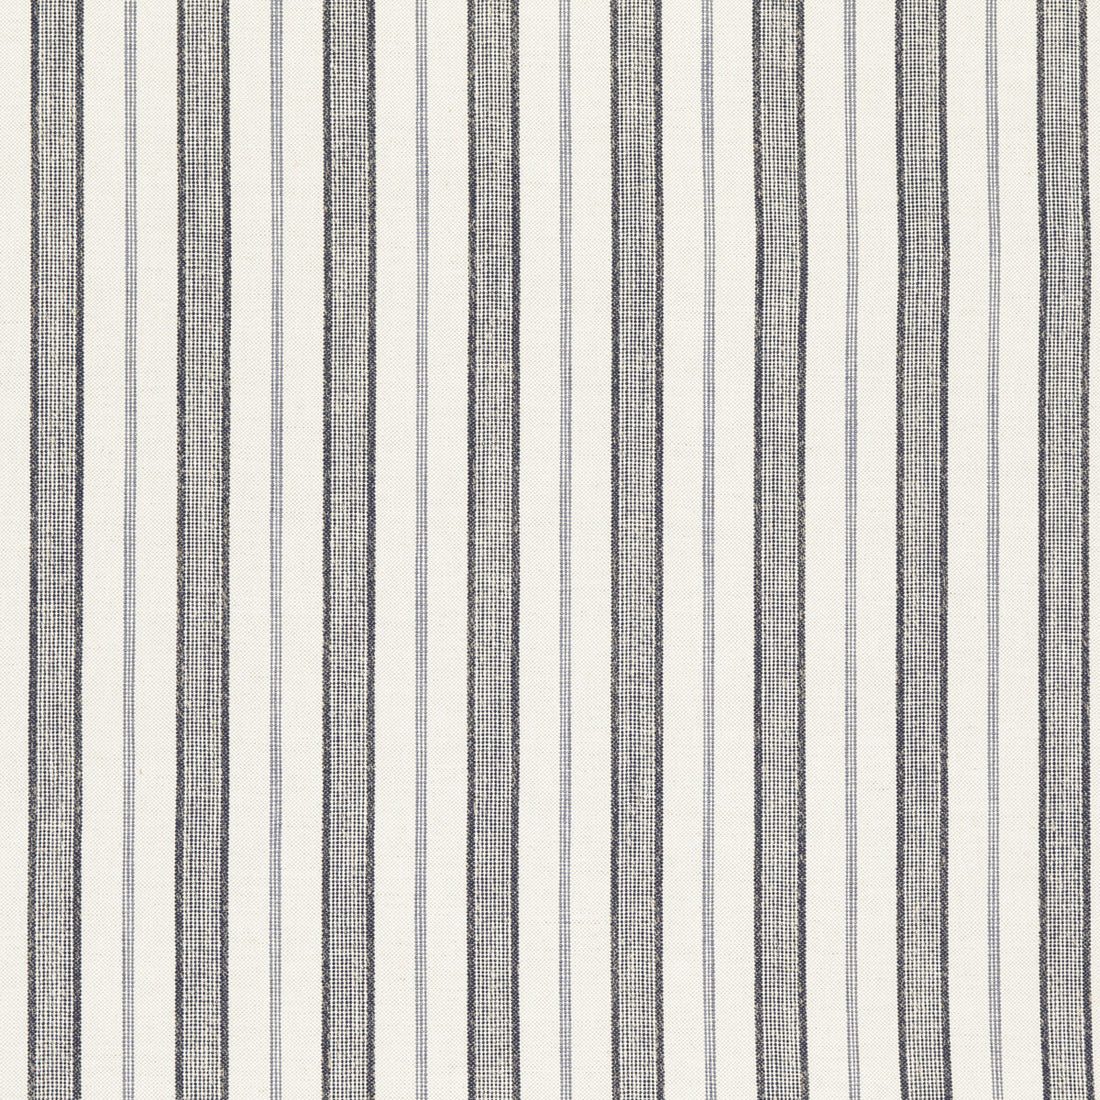 Stirling fabric in indigo color - pattern ED85313.680.0 - by Threads in the Great Stripes collection